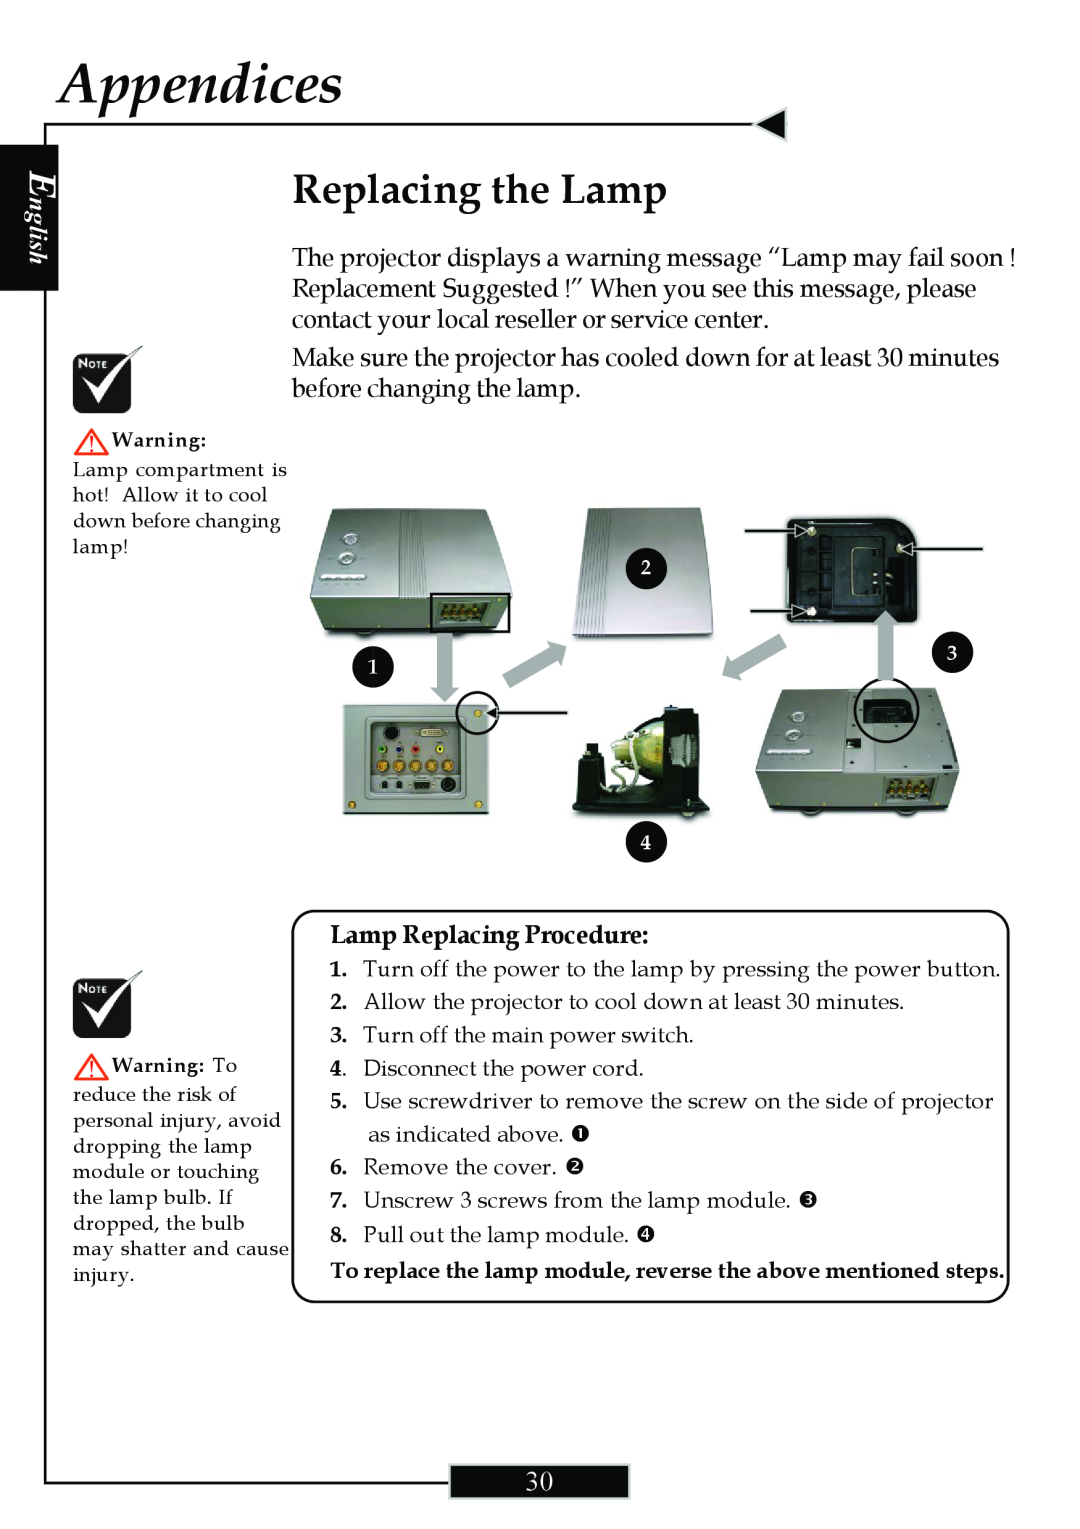 Optoma Technology H77 manual Replacing the Lamp, Appendices, English, Lamp Replacing Procedure 